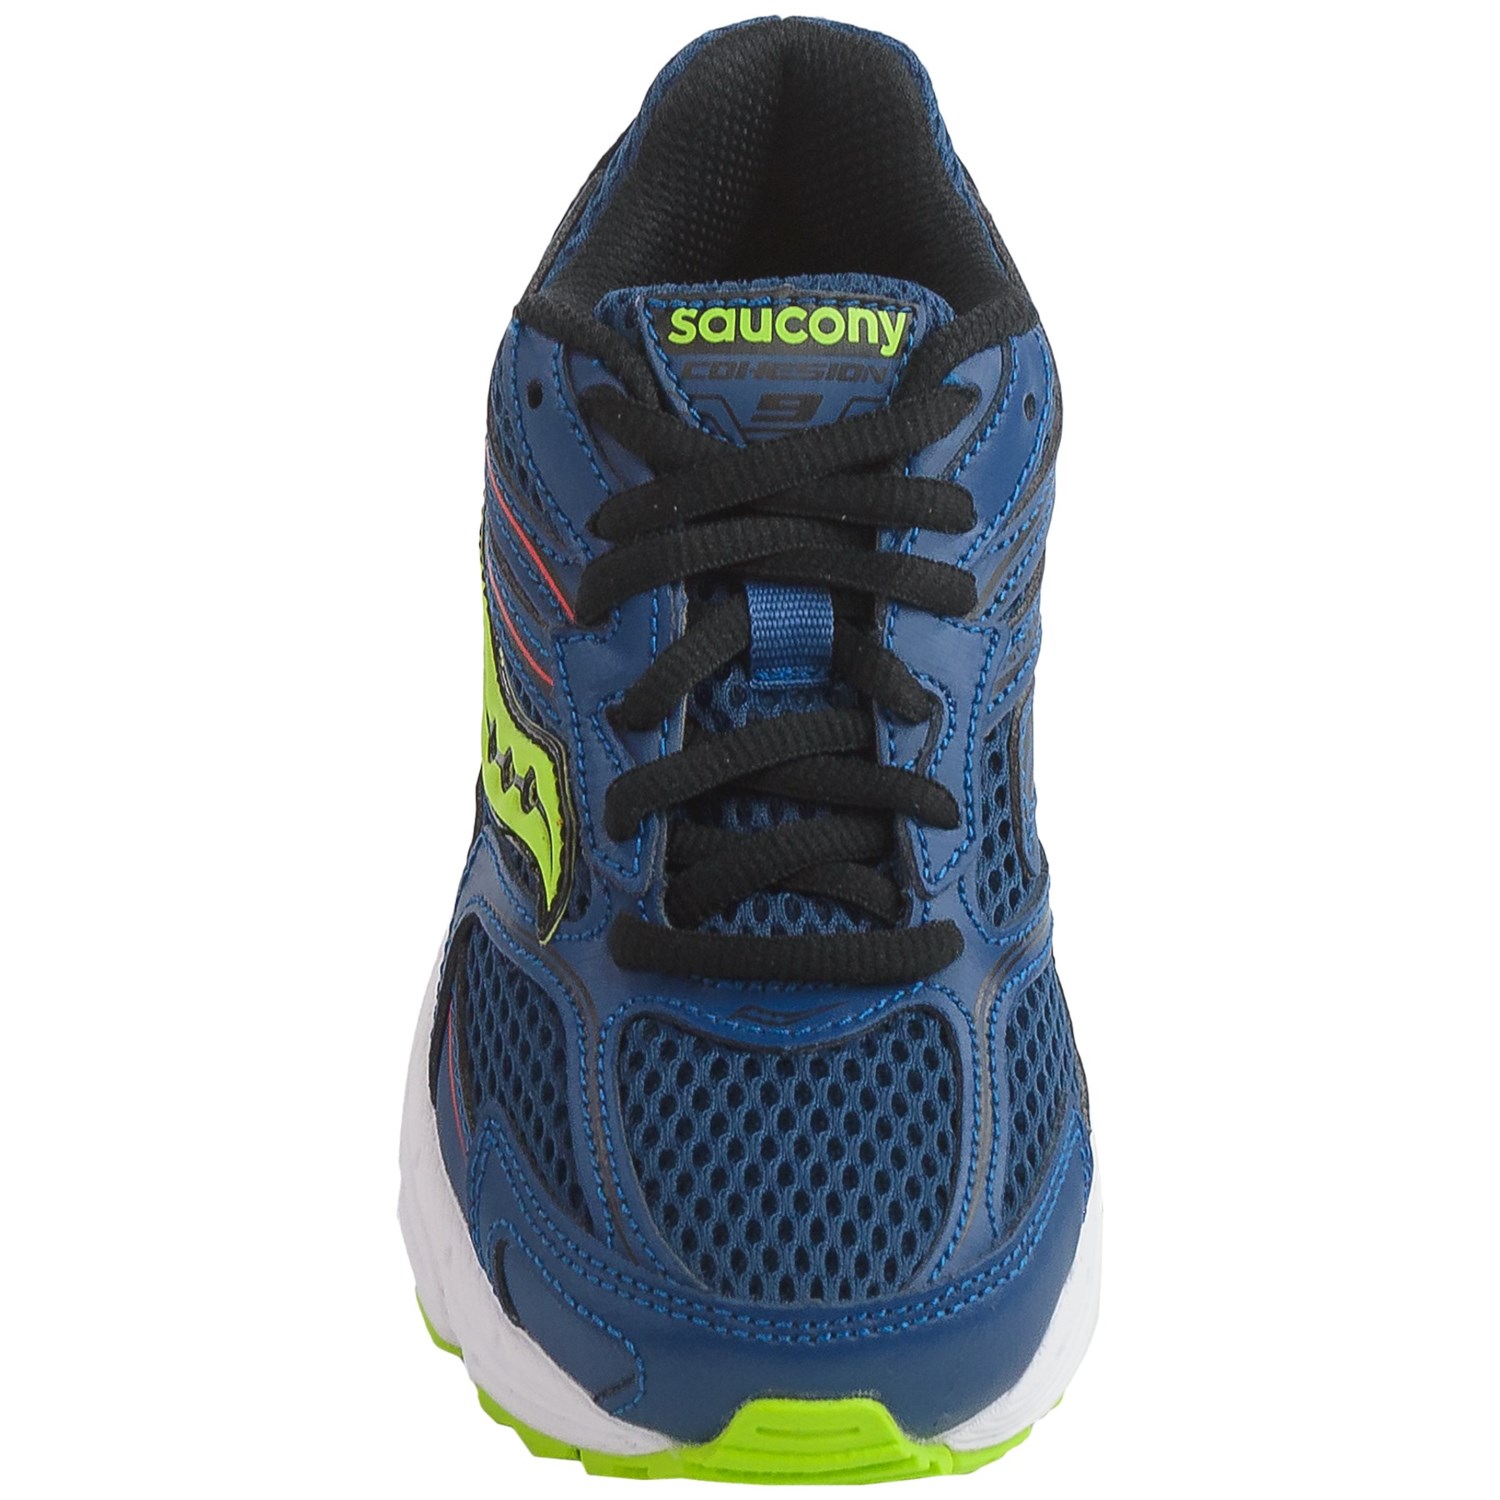 are saucony true to size